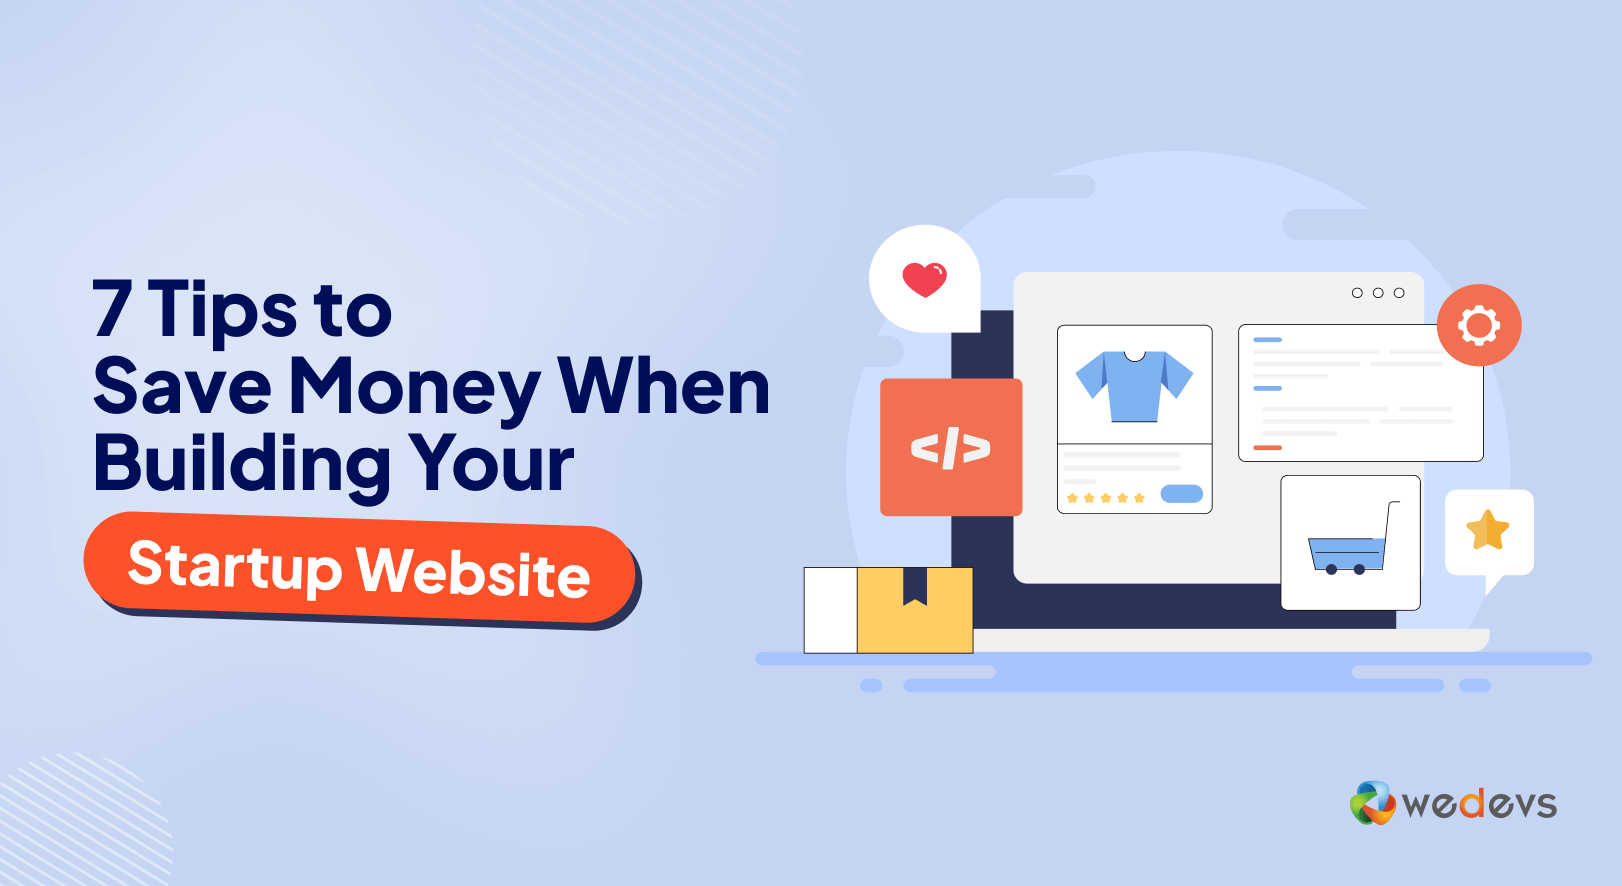 7 Tips to Save Money When Building Your Startup Website